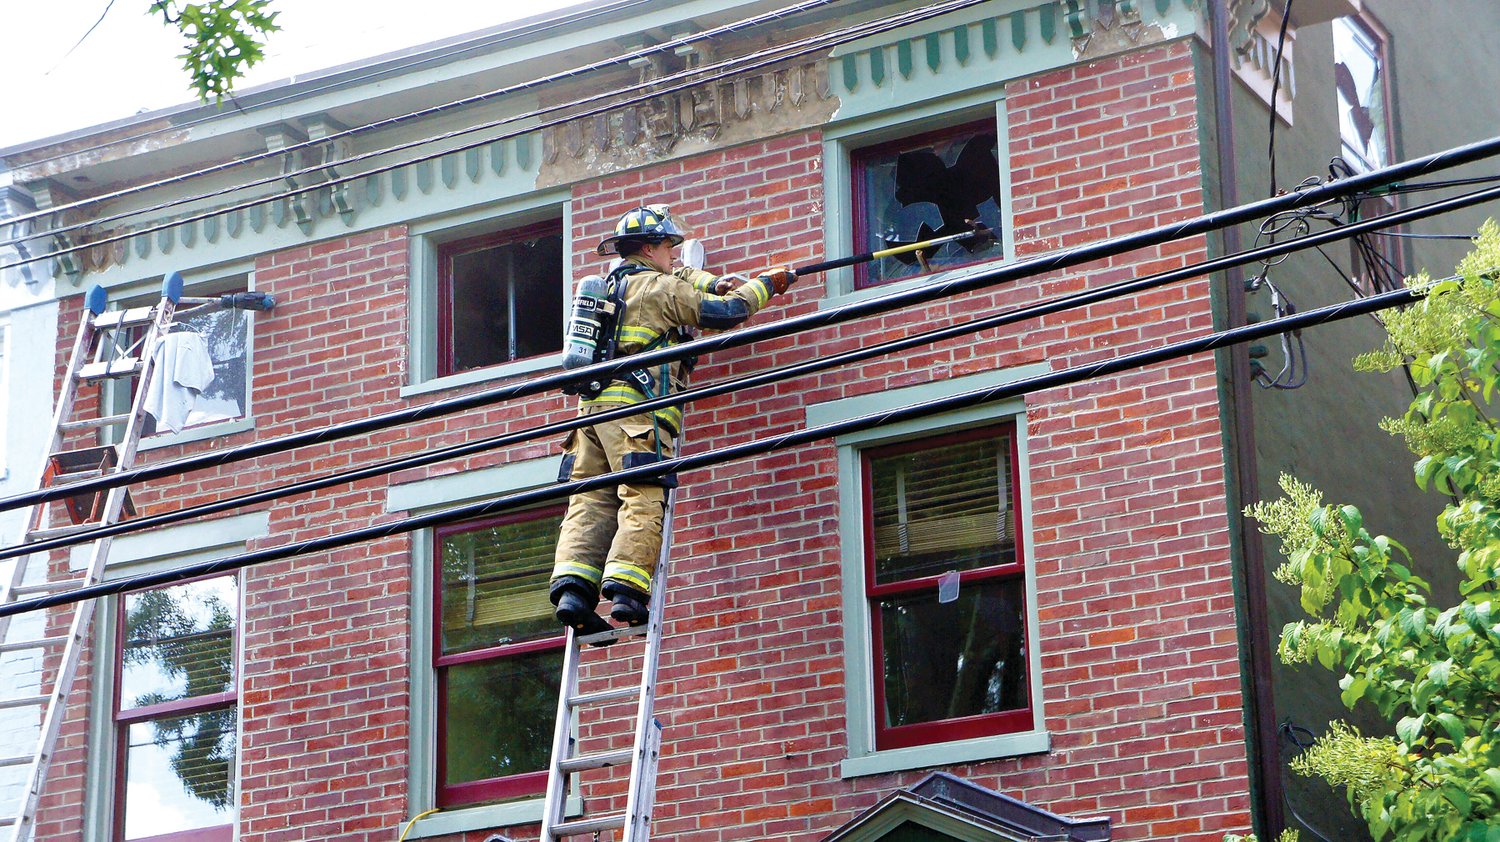 A firefighter works at the scene of an Aug. 9 blaze in Lambertville, N.J. Photograph by Jay Garrison.